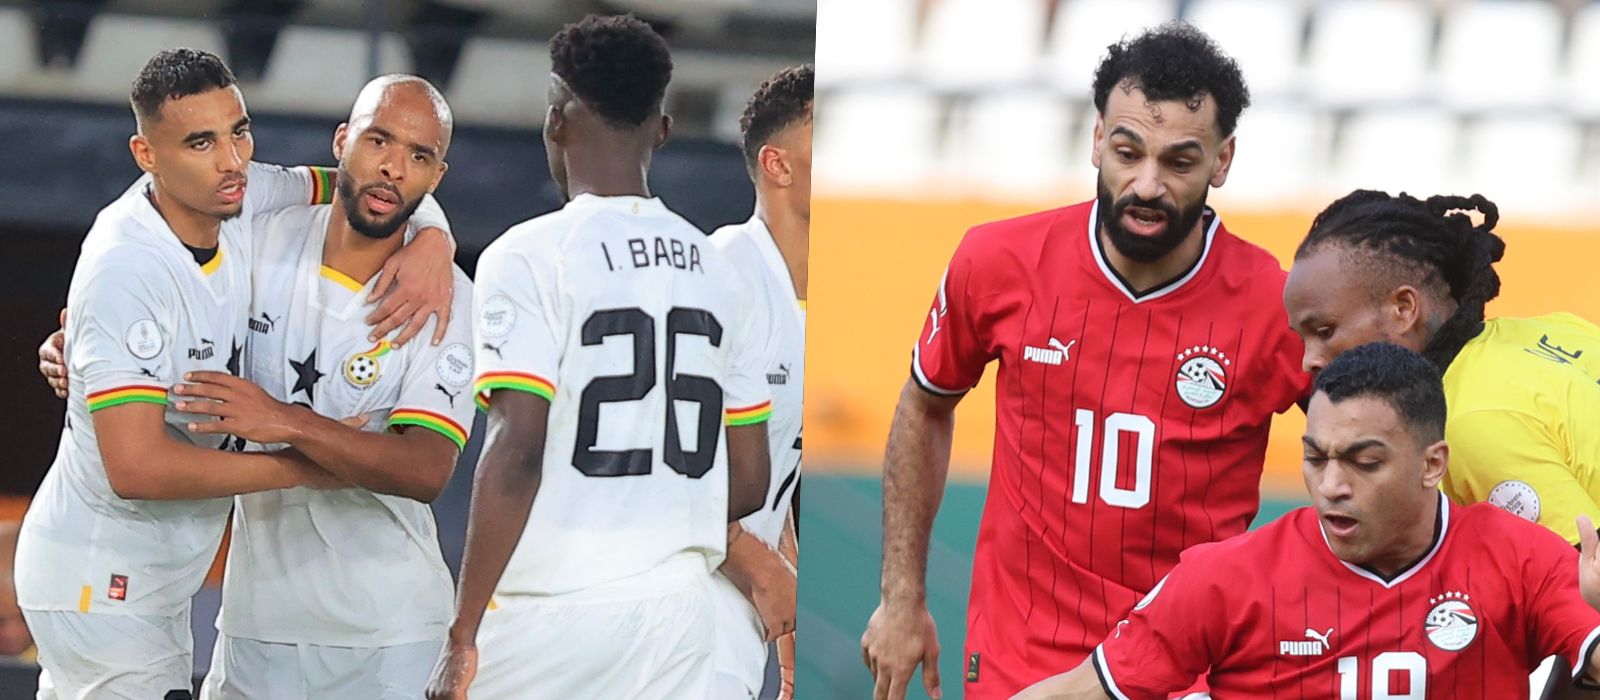 Ghana vs Egypt | Both sides aiming for nothing less than a victory